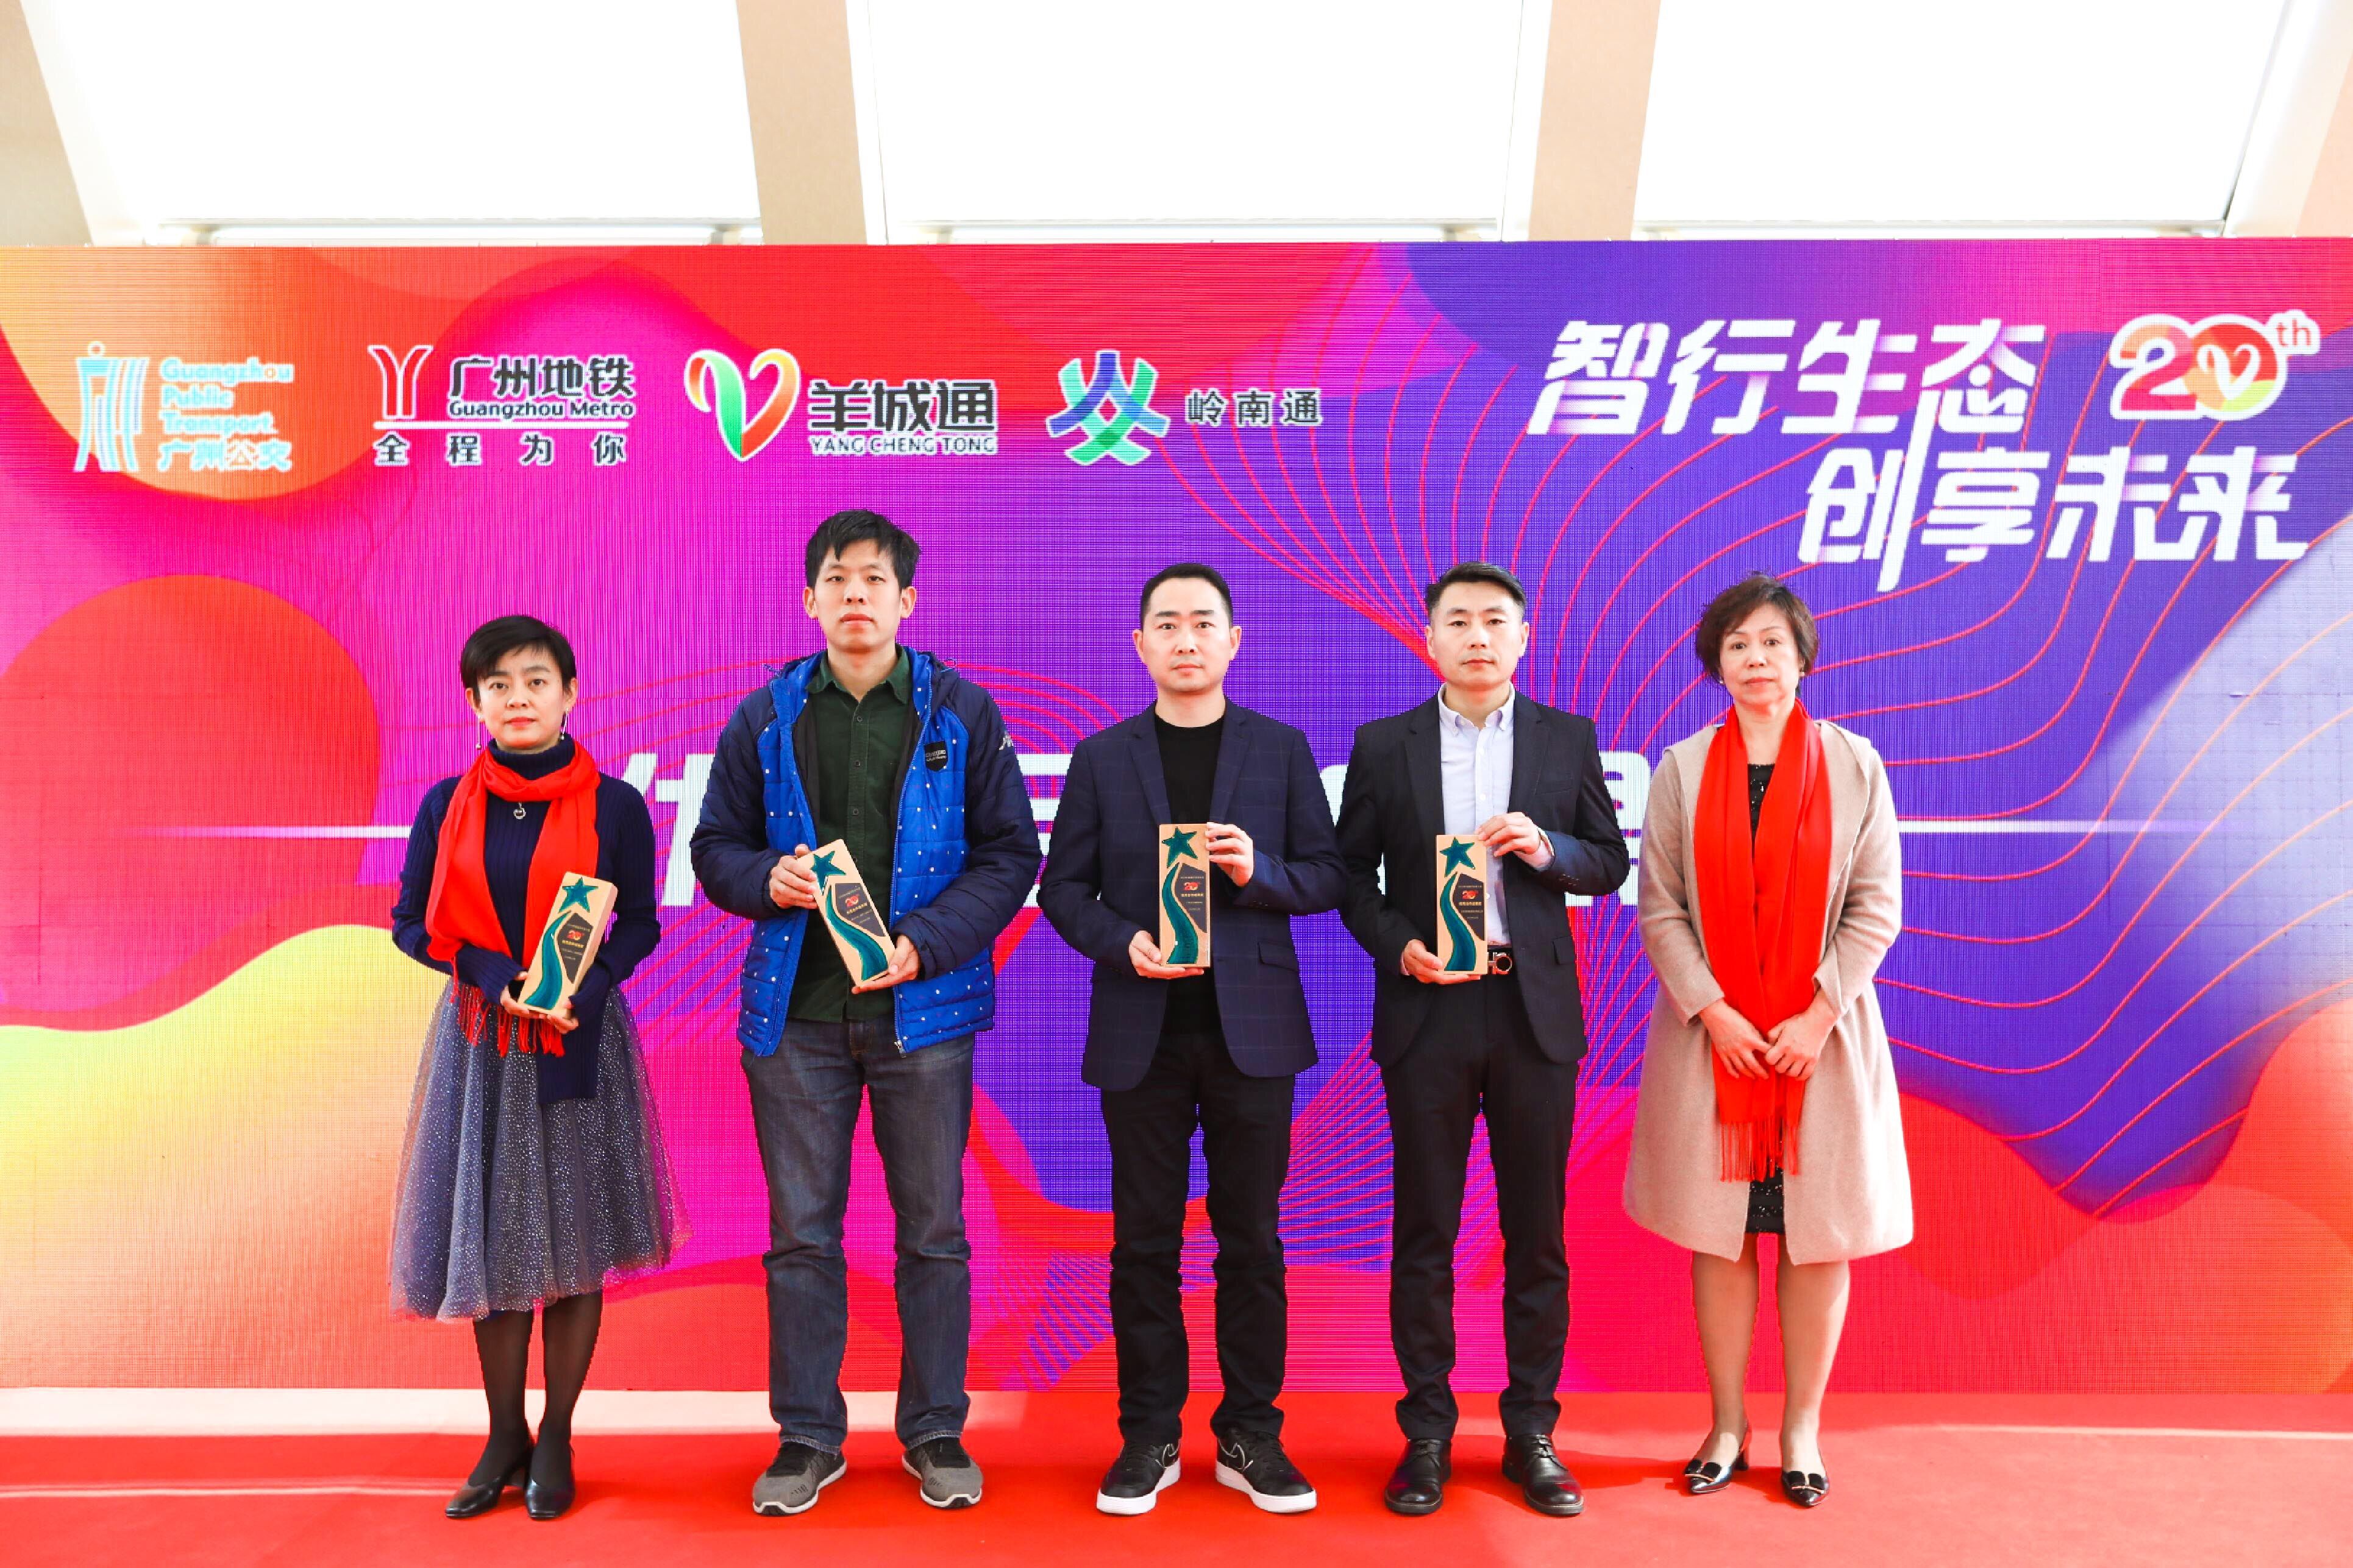 Excellent Cooperation Achievement Award at the 3rd Yang Cheng Tong Developers Conference held in Guangzhou on 28 December 2019